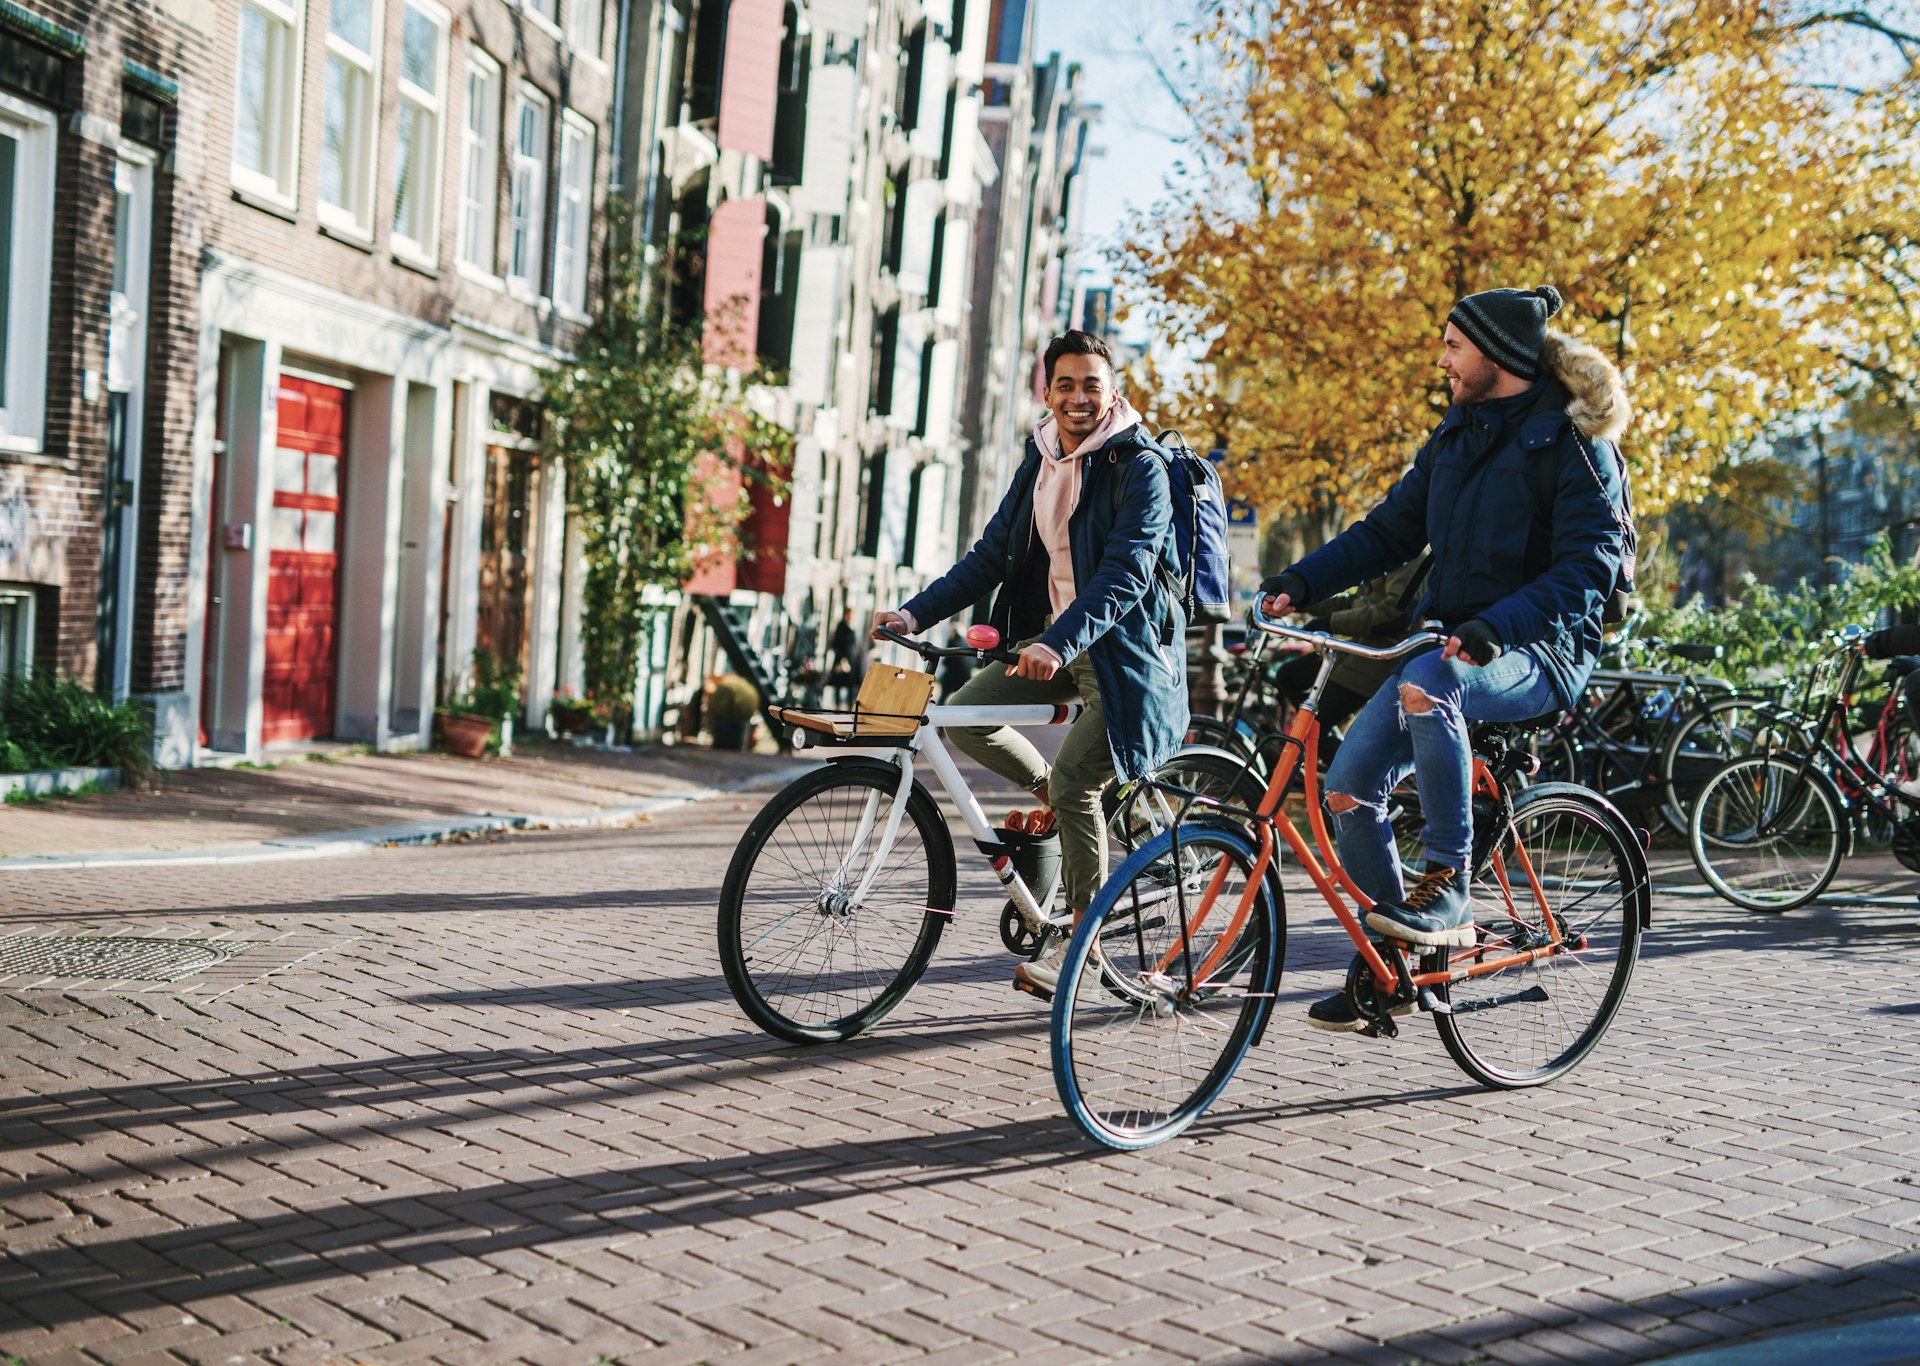 A couple bikes down a road in Amsterdam